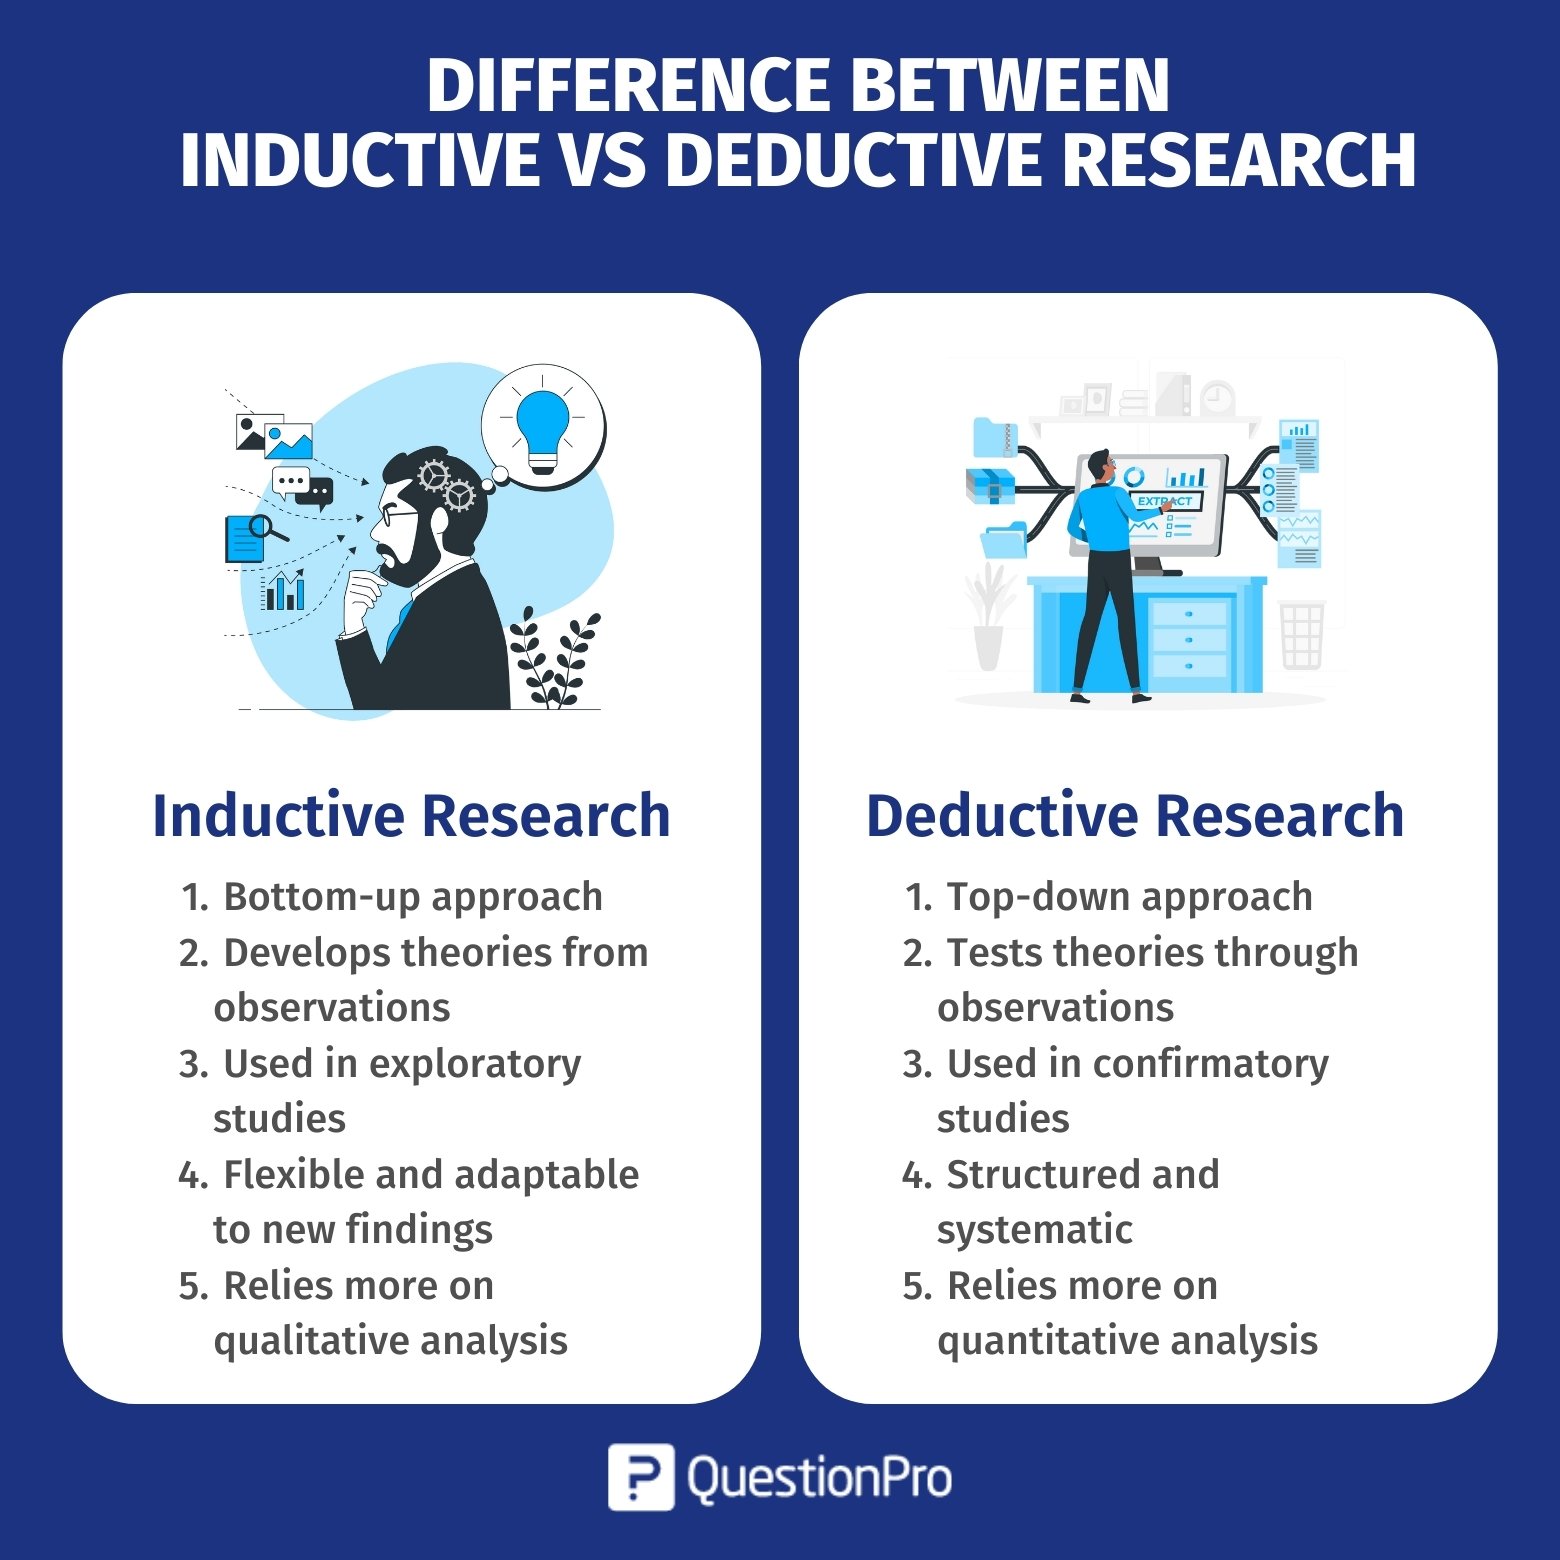 qualitative research uses an inductive approach. what does this mean